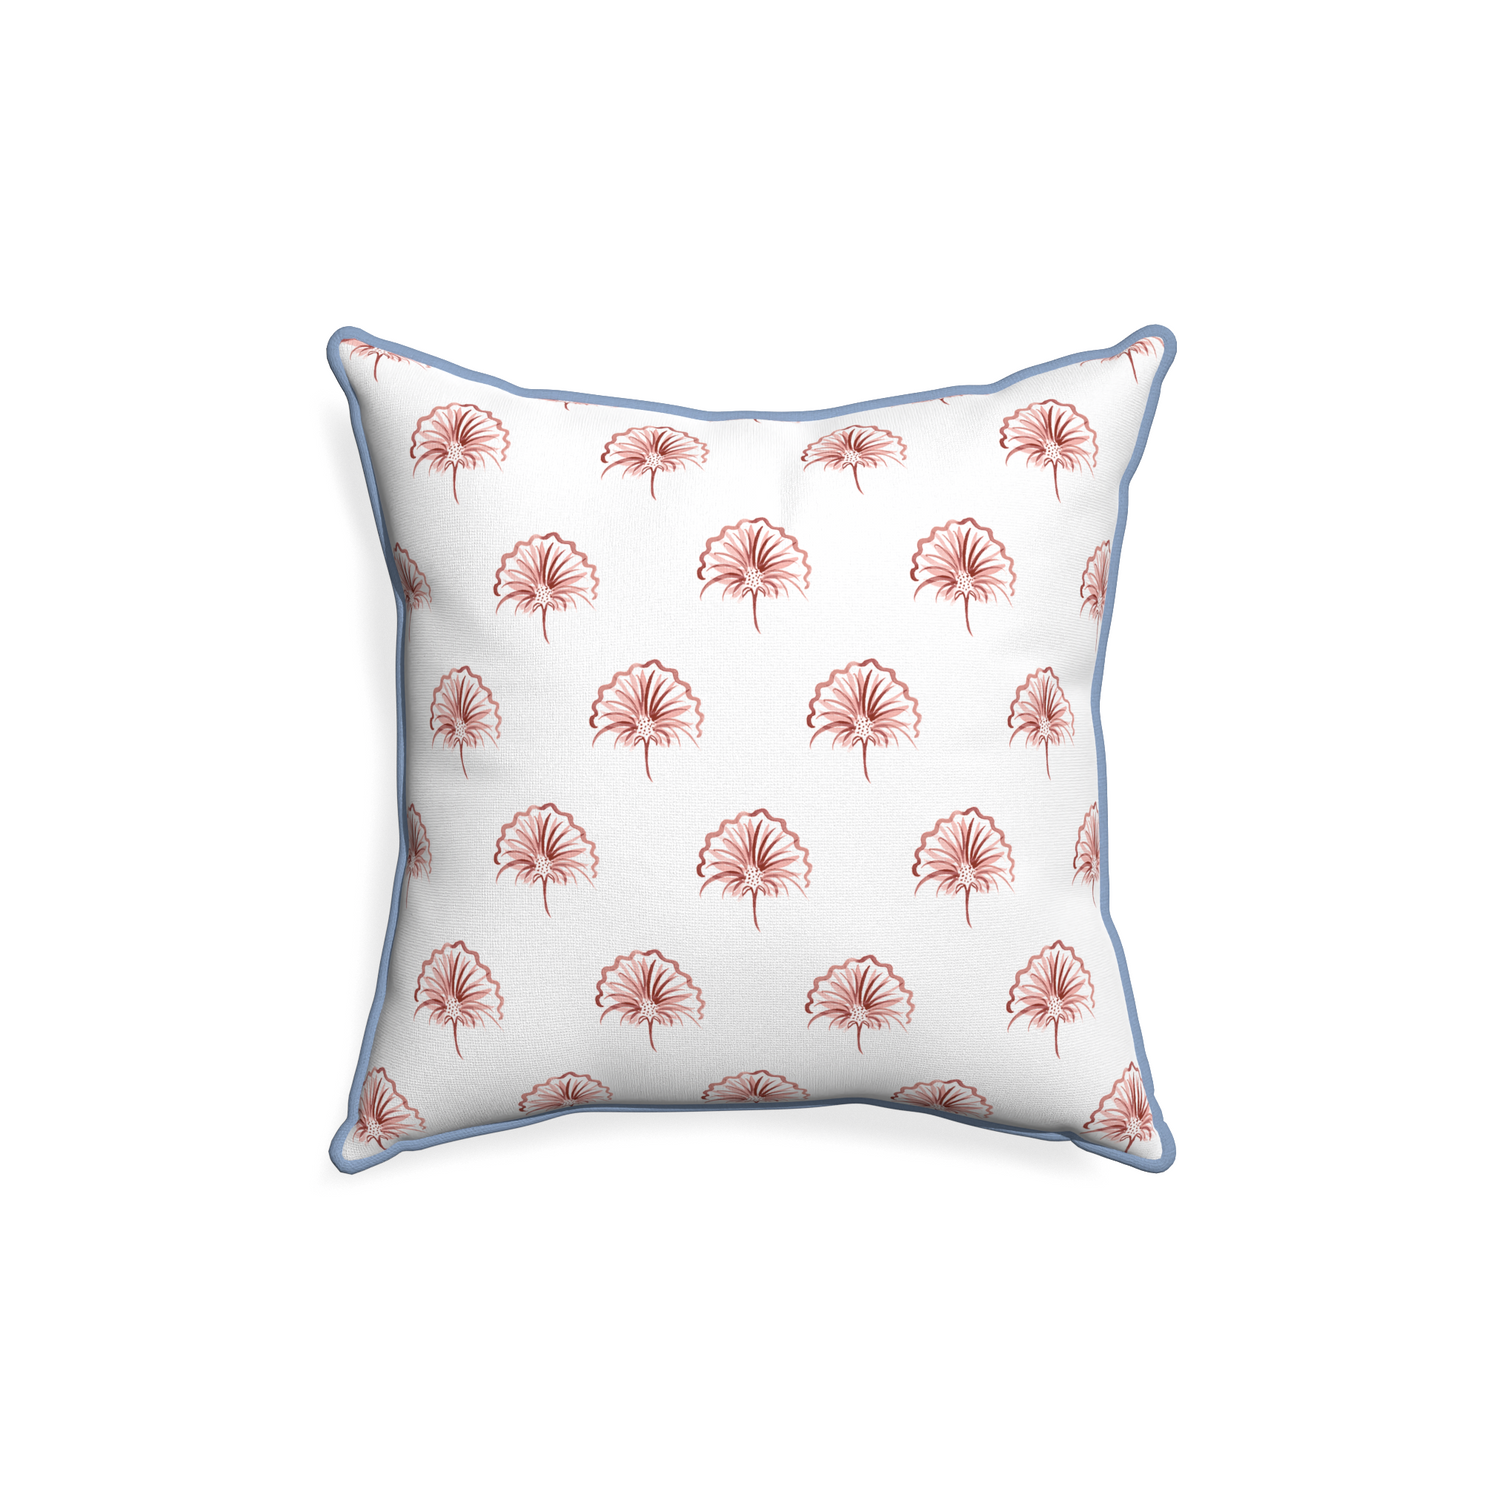 18-square penelope rose custom floral pinkpillow with sky piping on white background